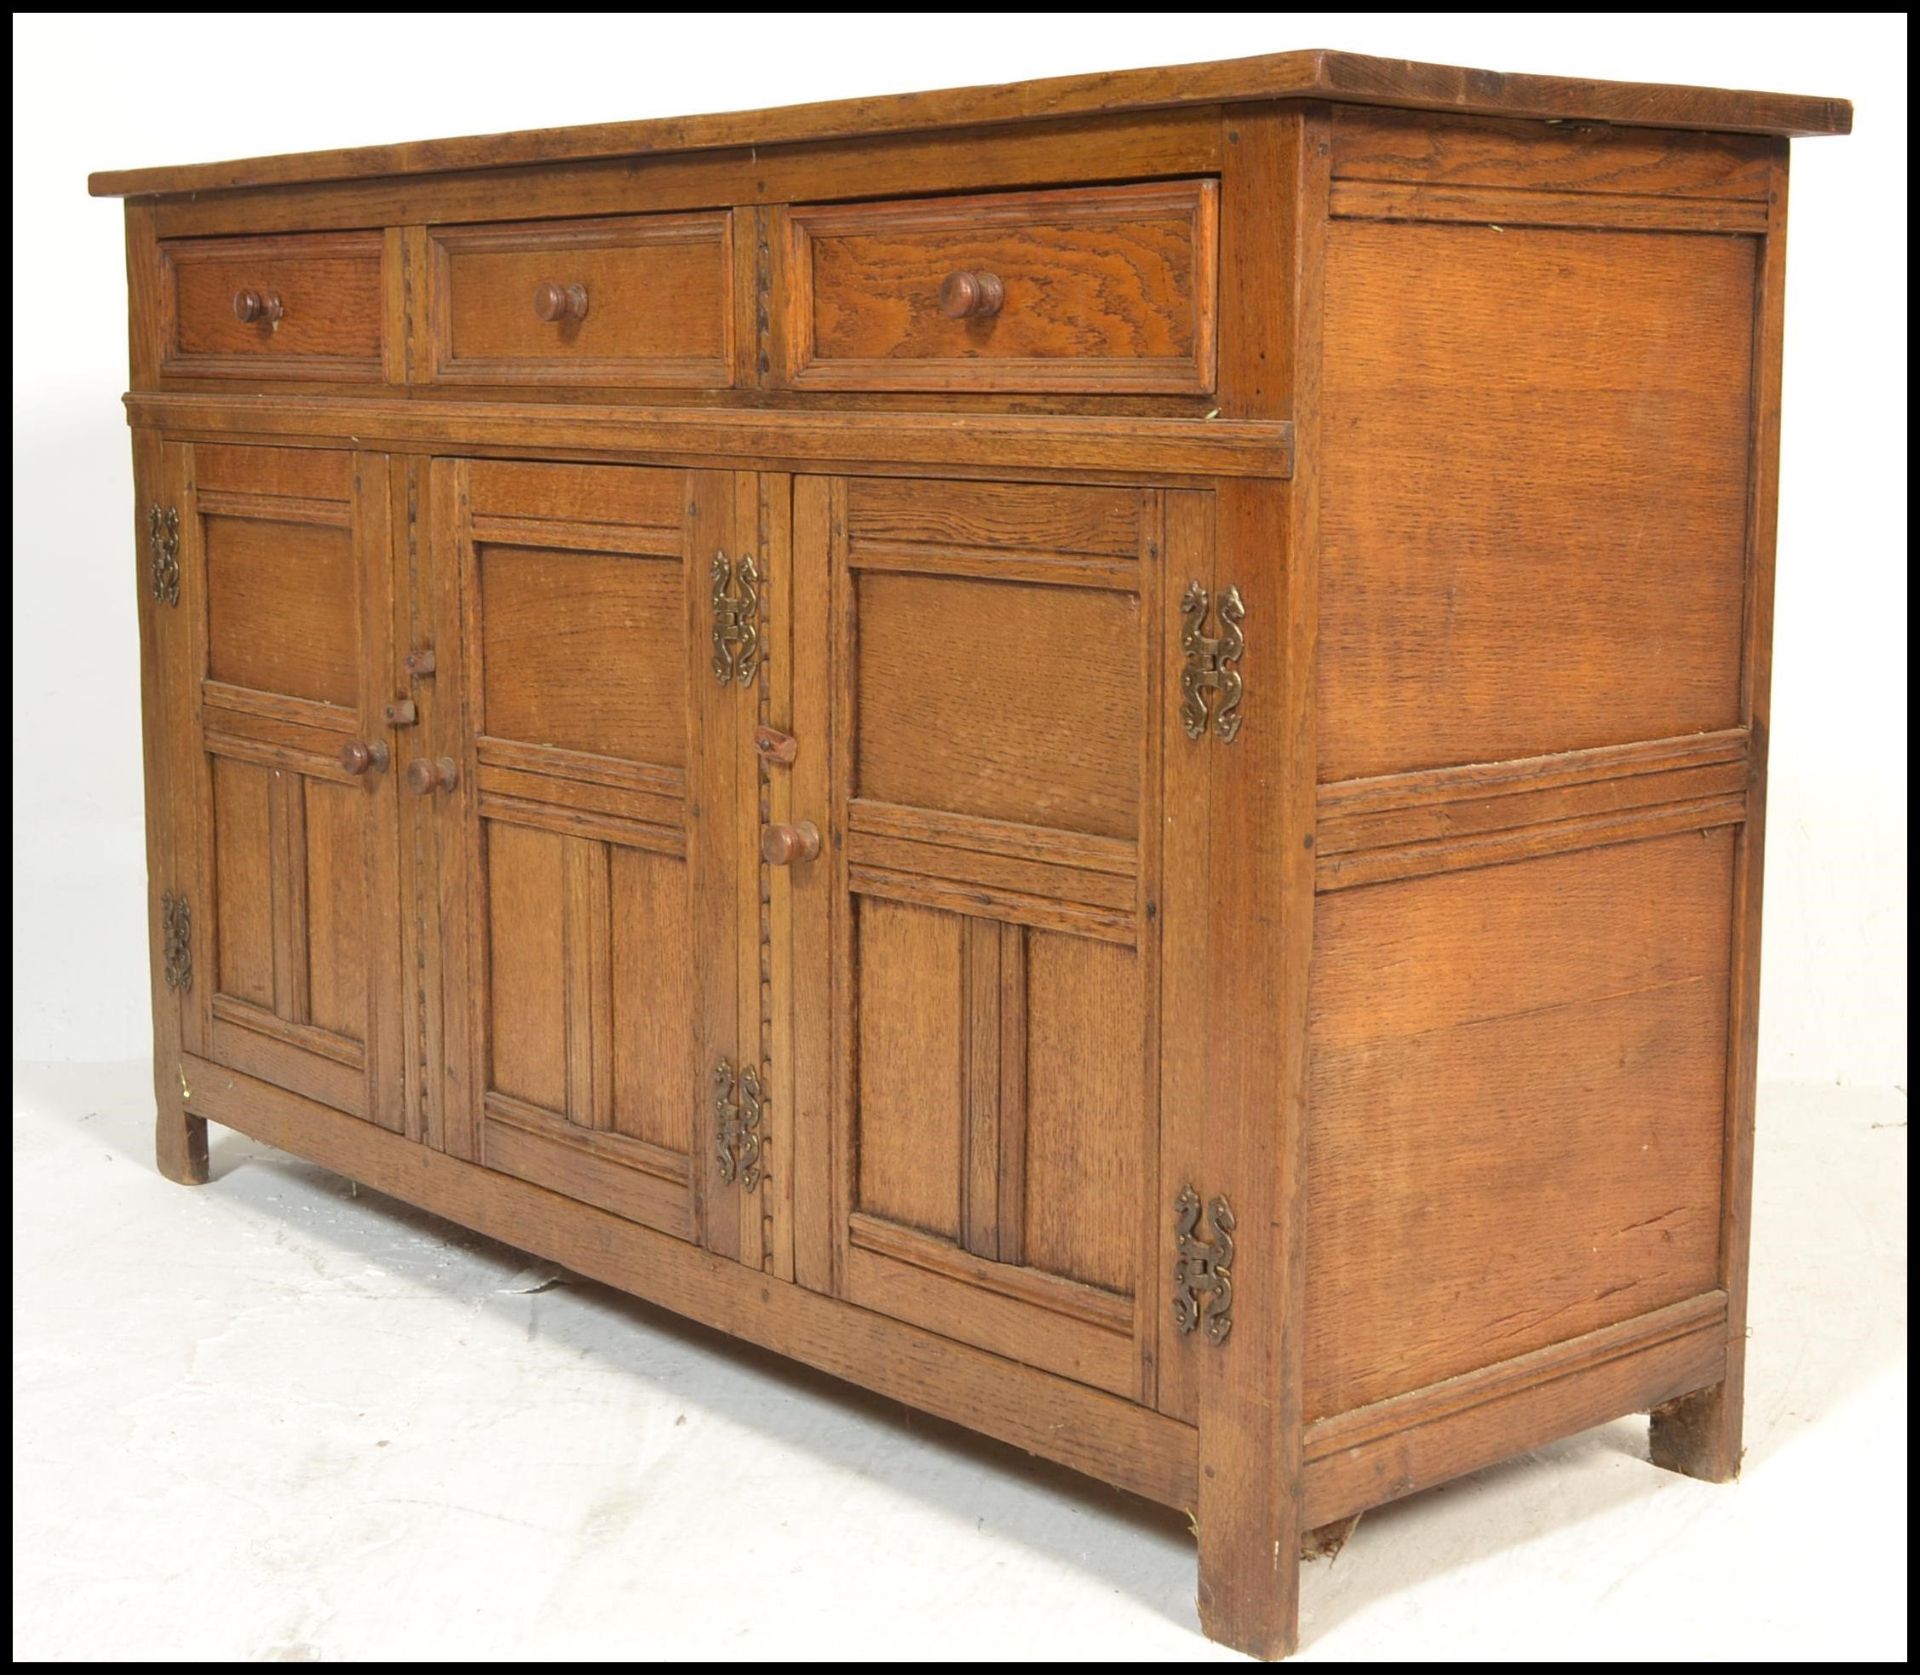 A 20th Century oak Jacobean revival sideboard credenza, flared top over a configuration of drawers - Image 3 of 6